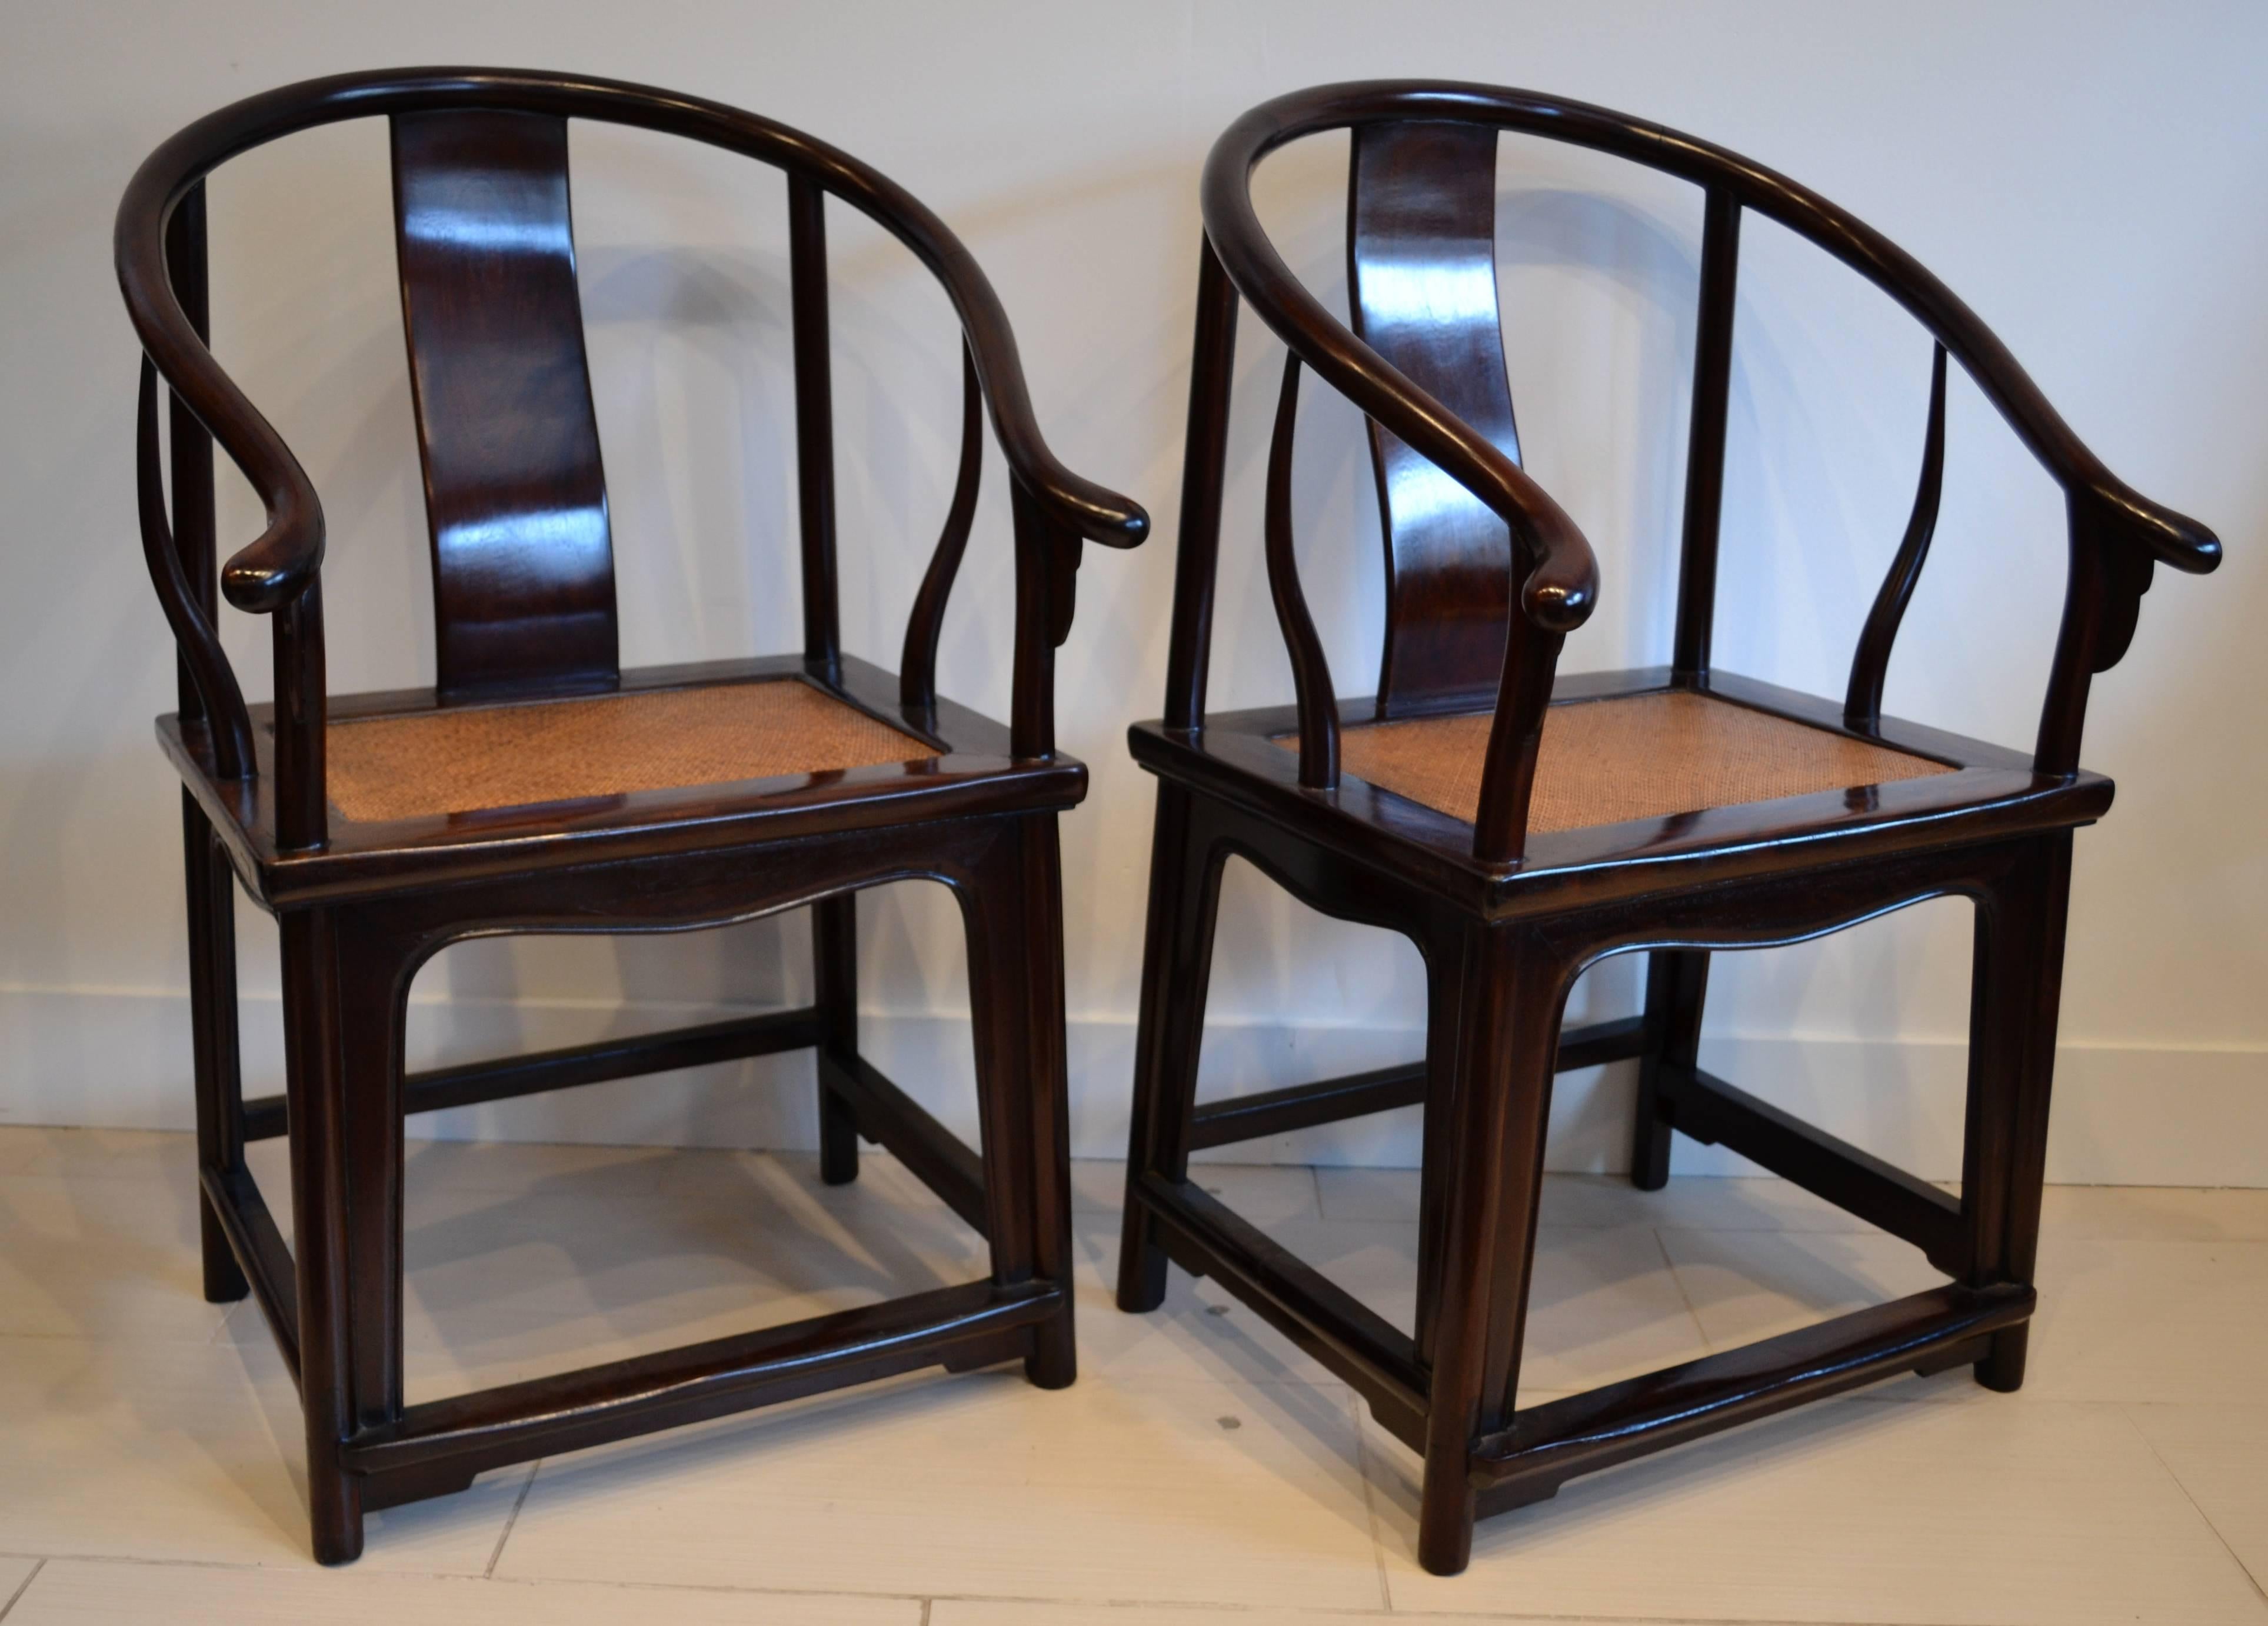 Impressive pair of Chinese horseshoe back caned seat arm chairs, constructed of Chinese elm. heavy and beautifully made. gorgeous patina.